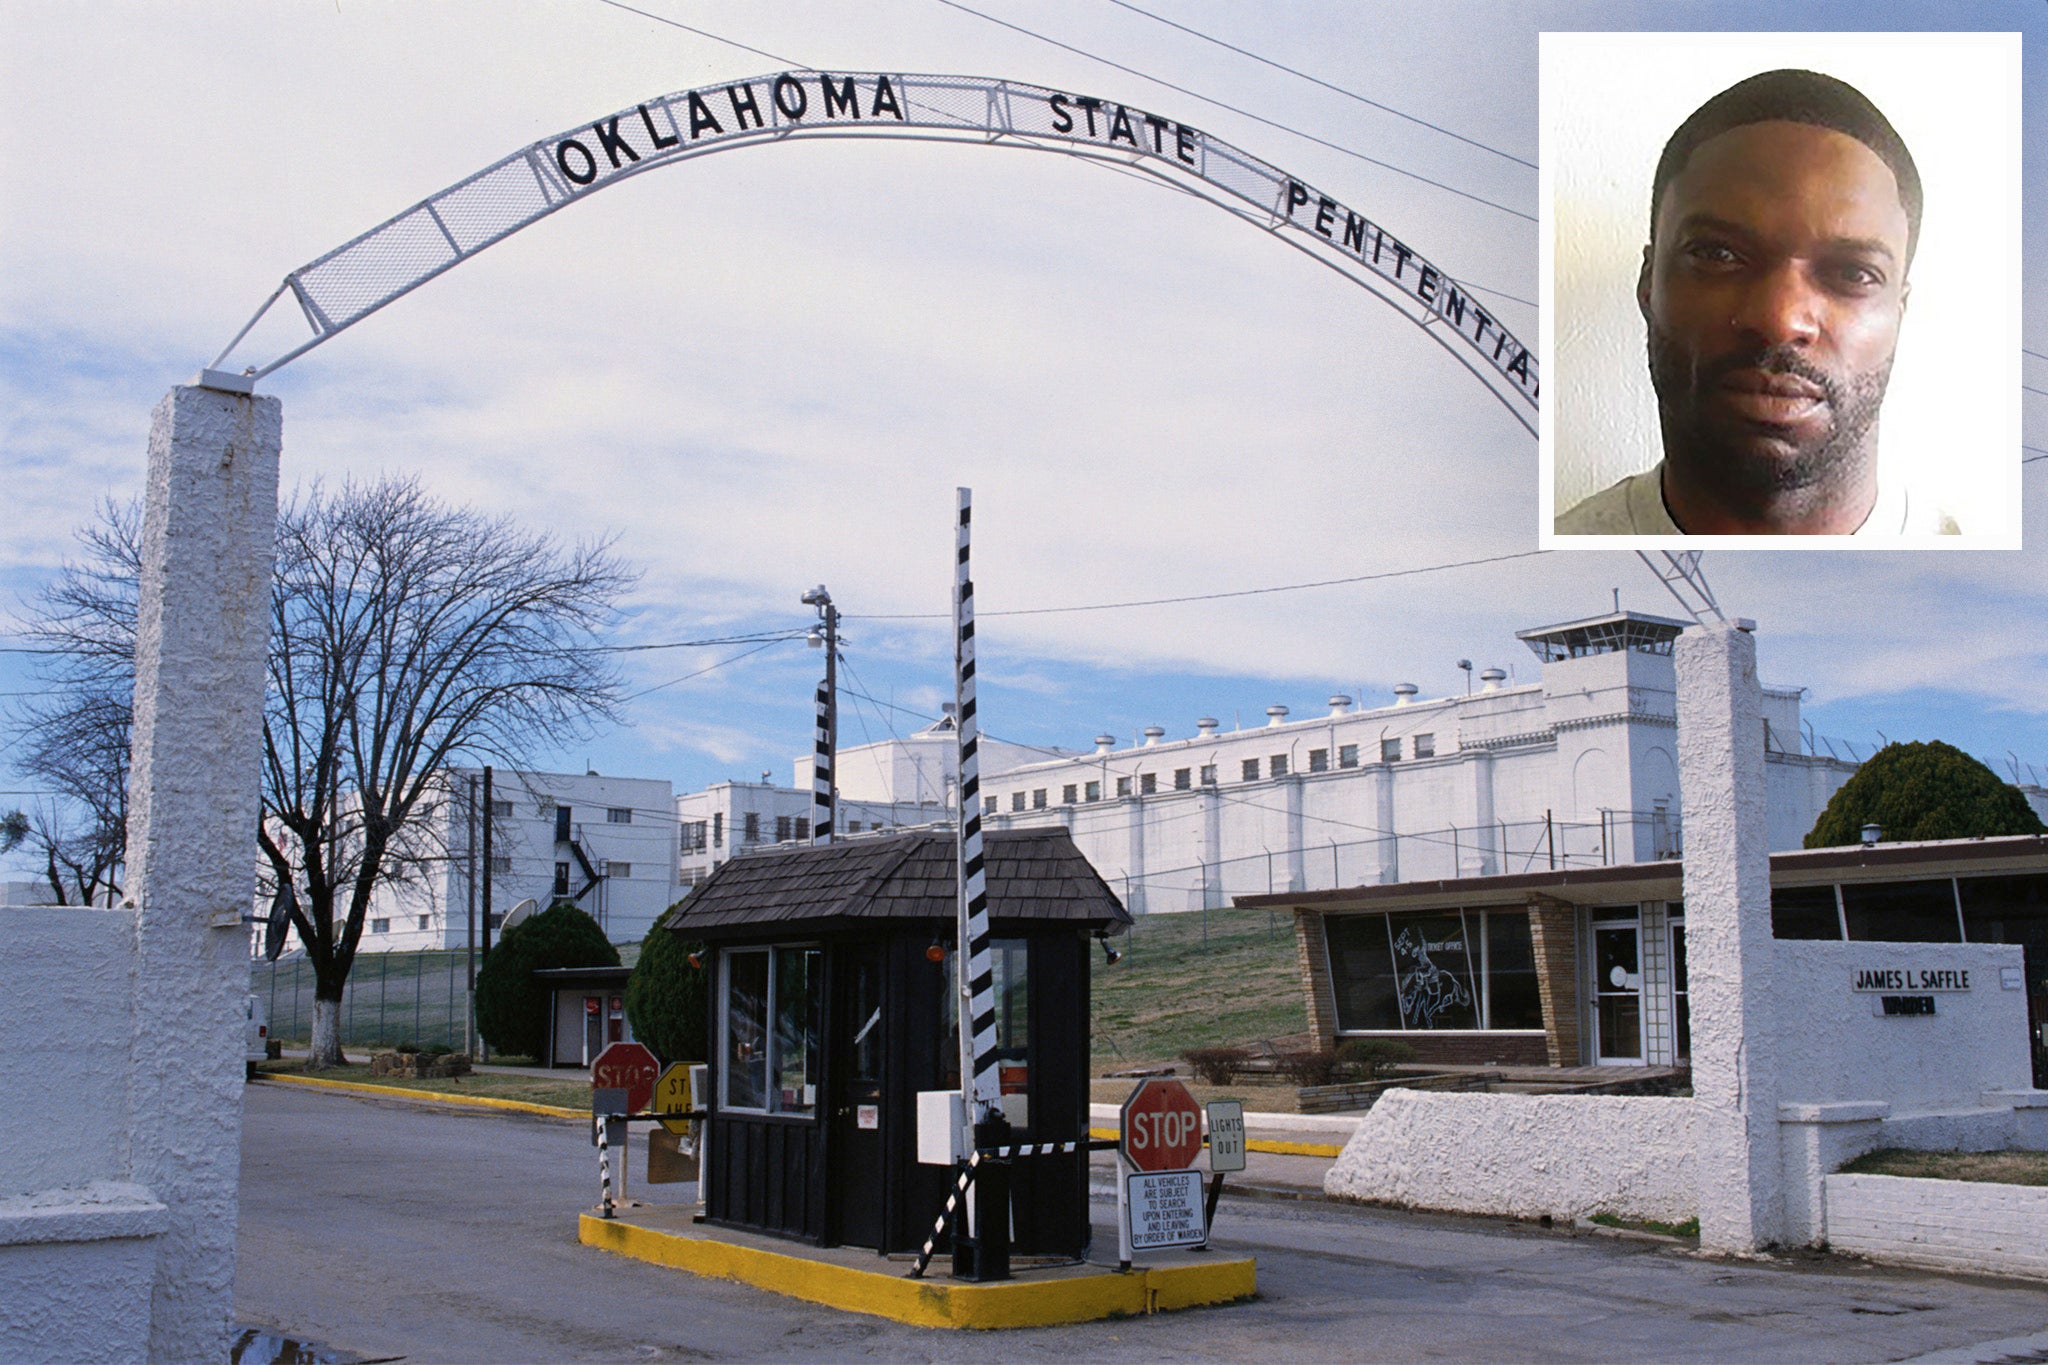 Entrance Gate and Guard Station at Oklahoma State Penitentiary